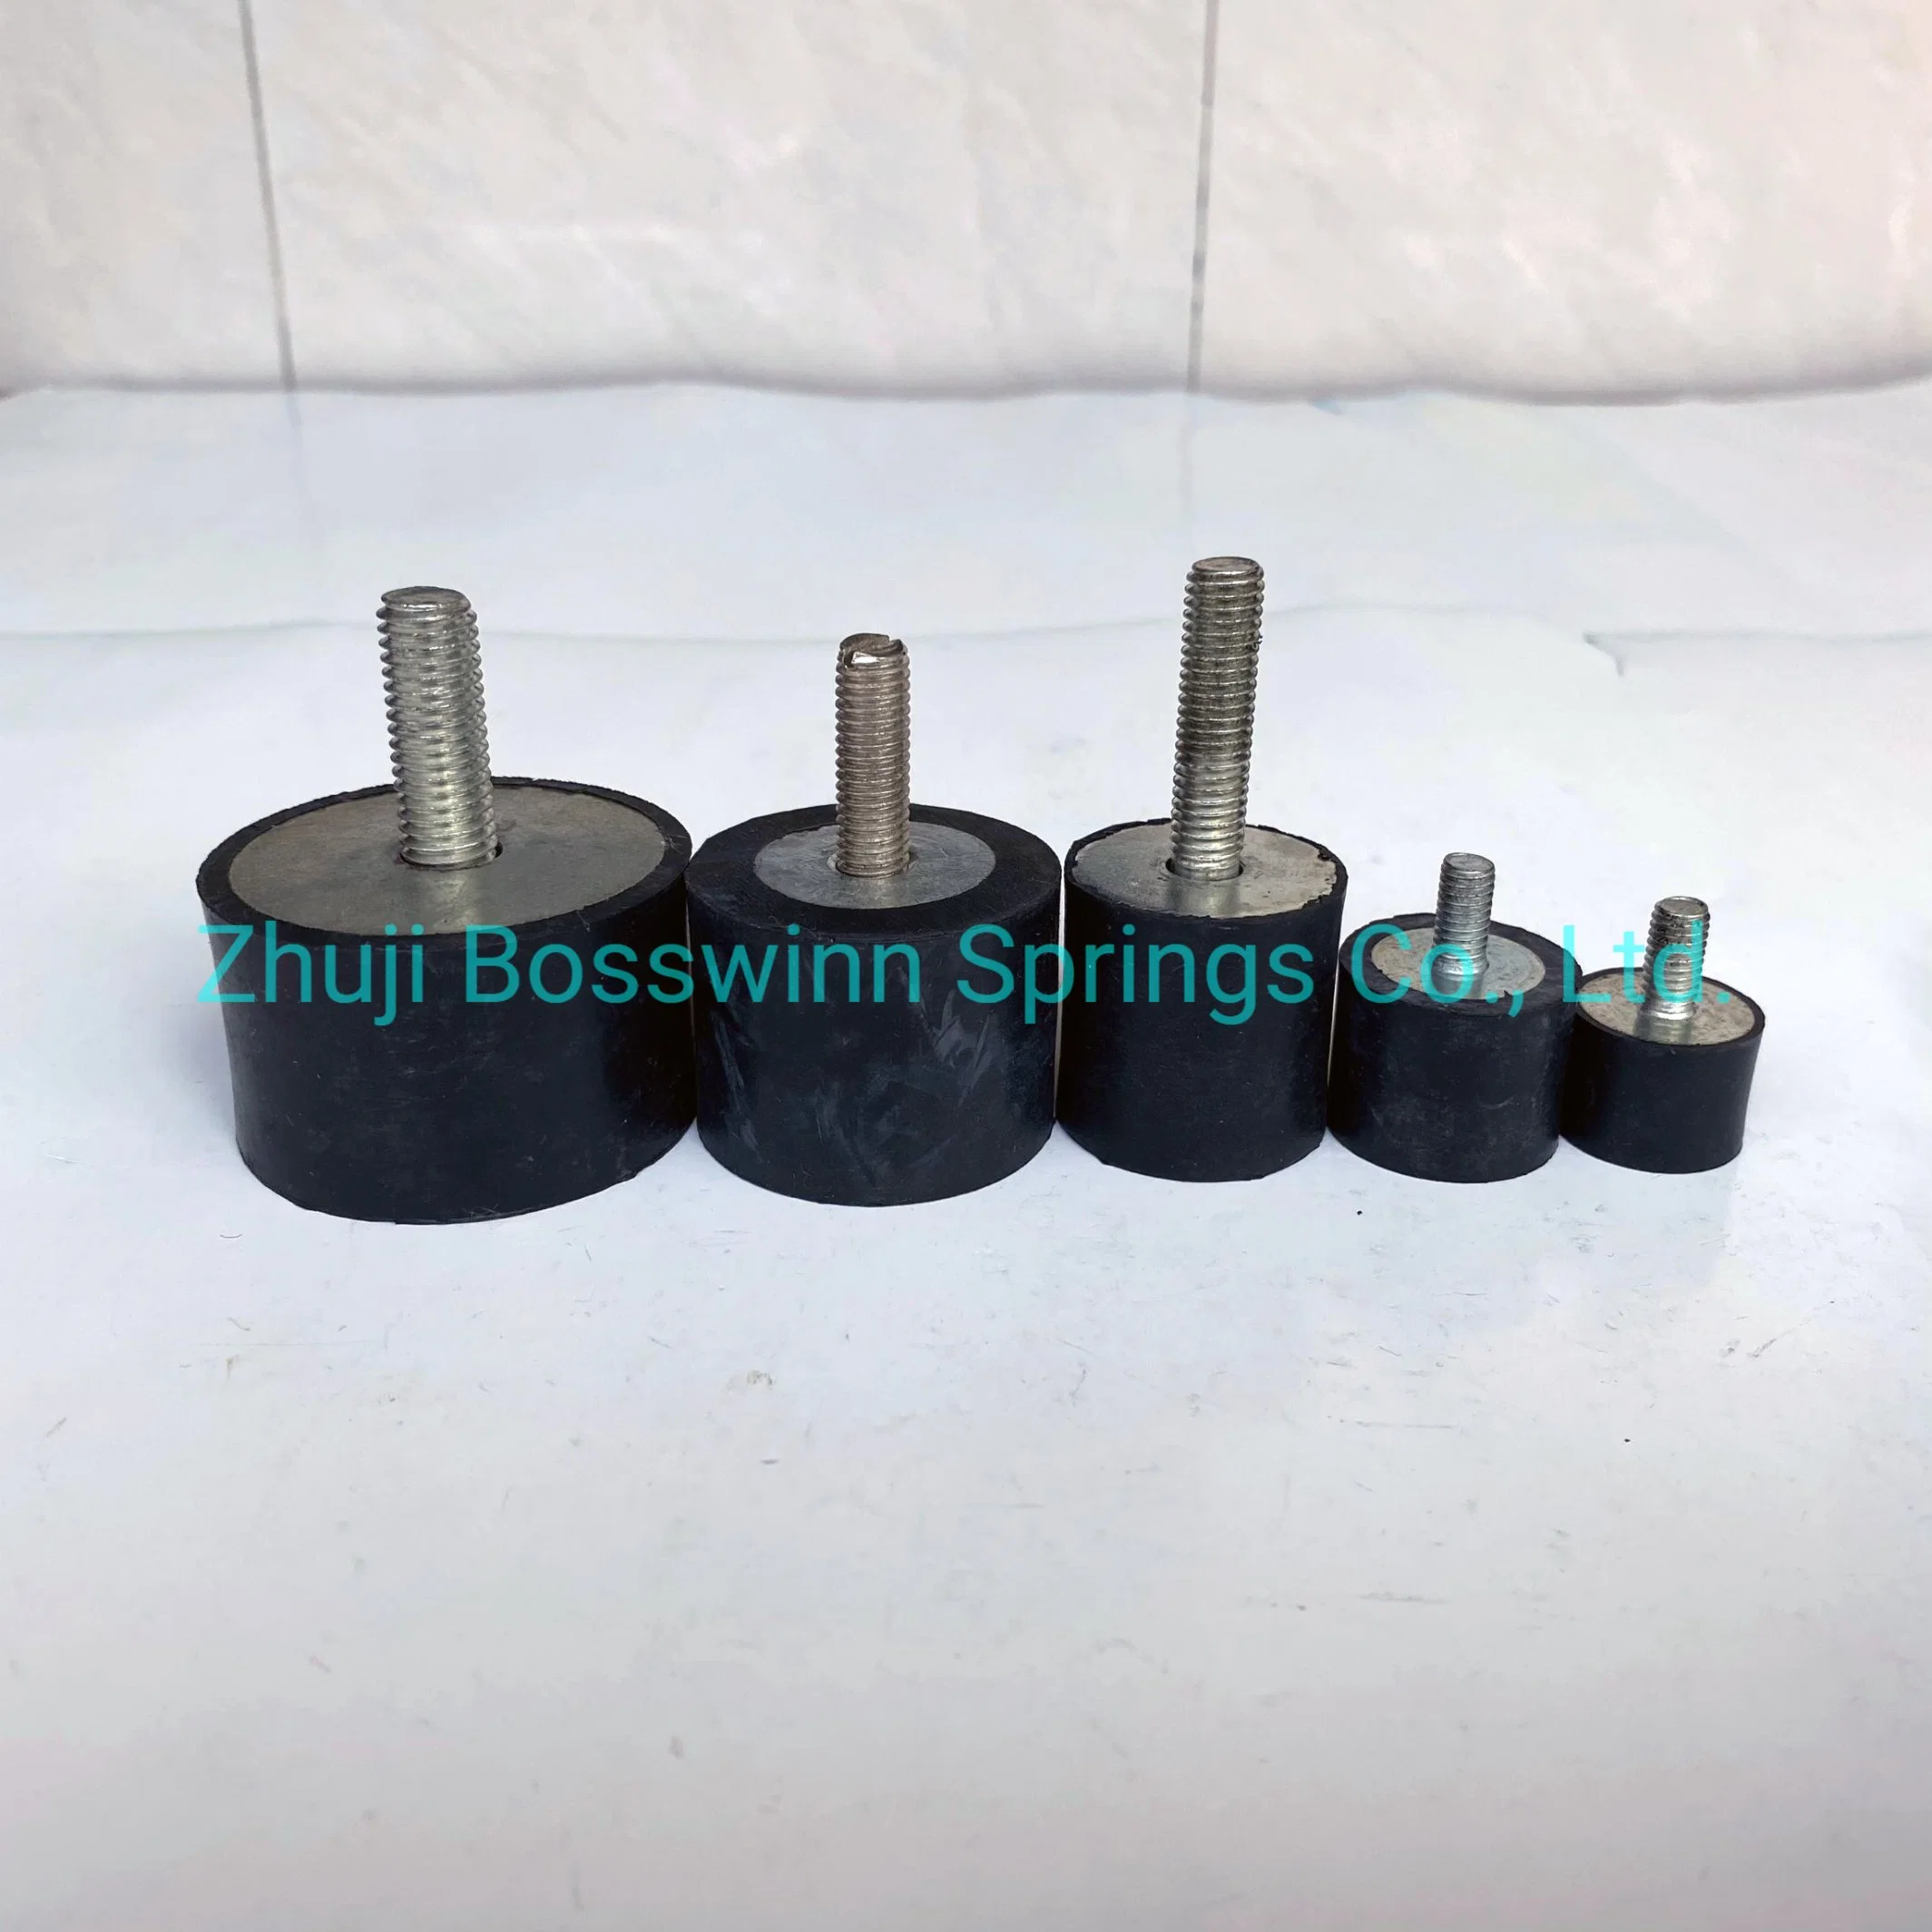 Isolators Rubber Shock Mounts Anti Vibration Feet Rubber Pads Vehicles Shock Absorbers